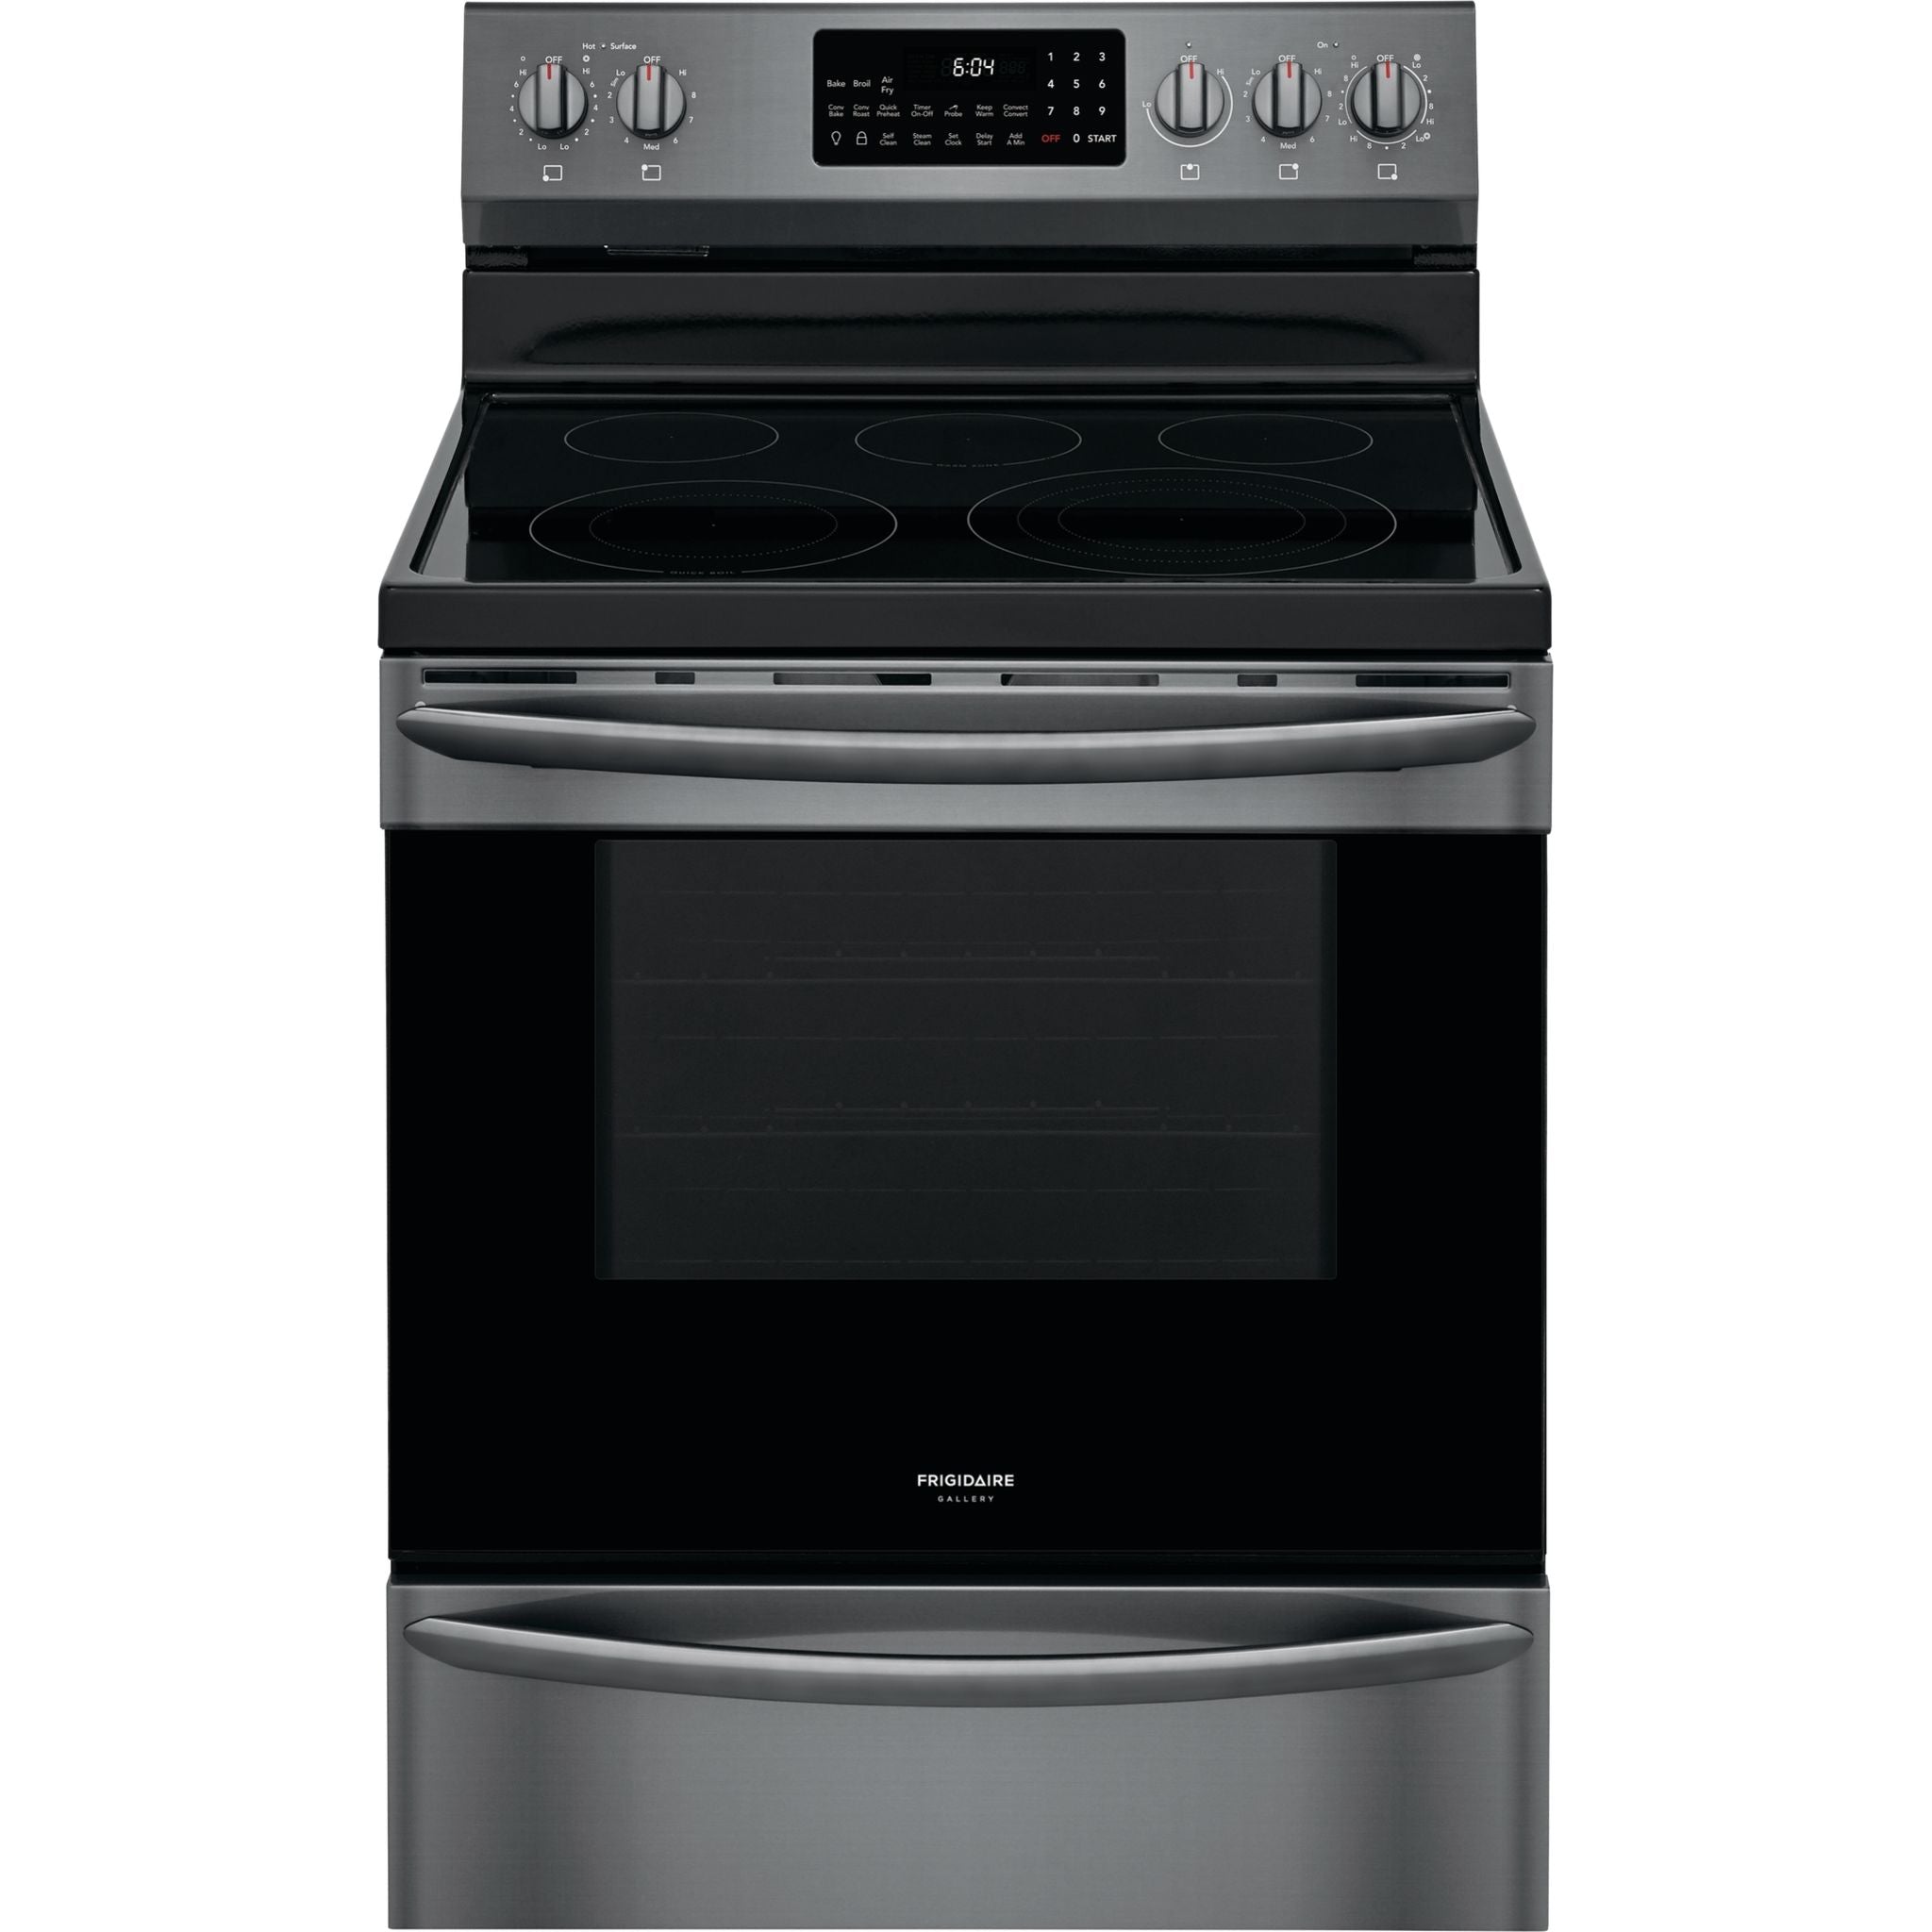 Frigidaire Gallery, Frigidaire Gallery 30" Electric Range (GCRE306CAD) - Black Stainless